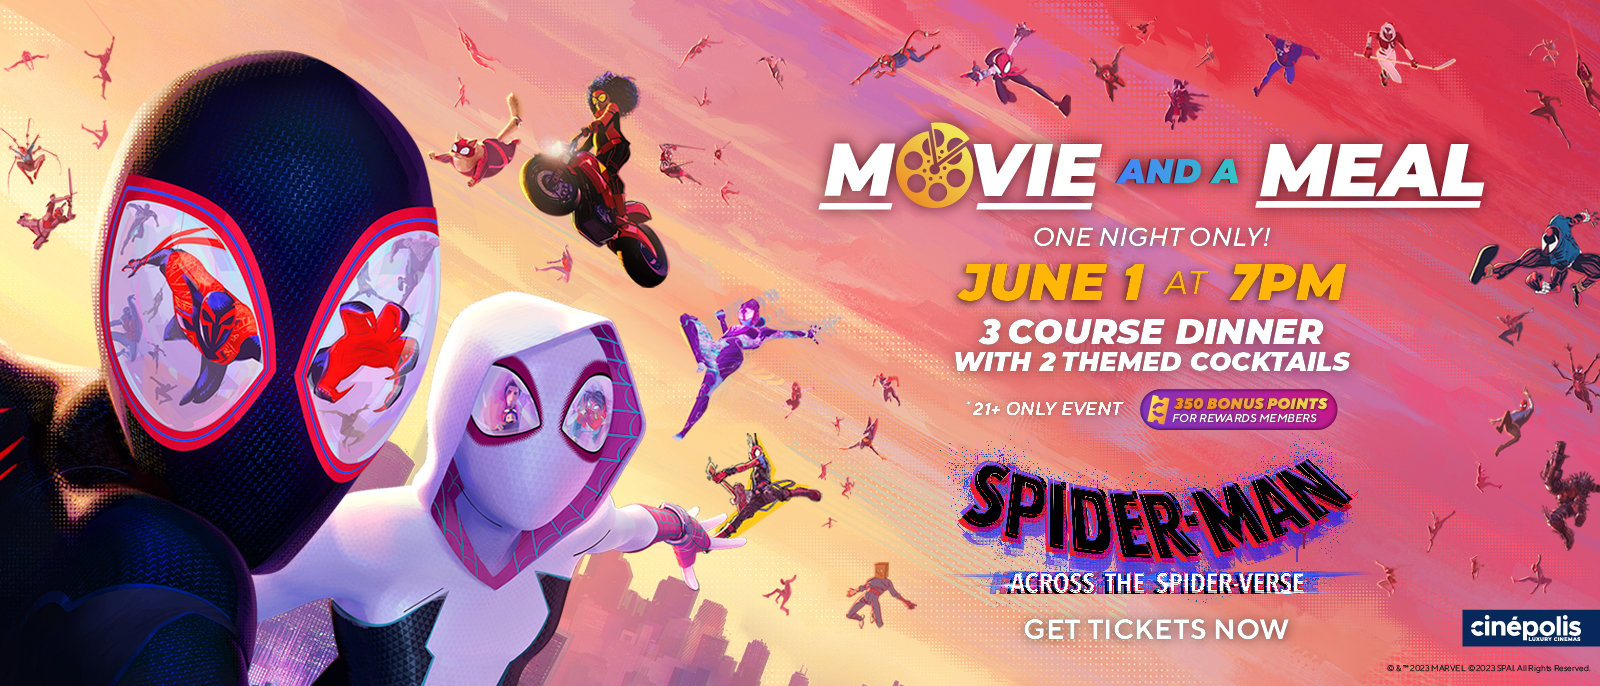 Spider-Man Dining Event at Cinepolis and Moviehouse